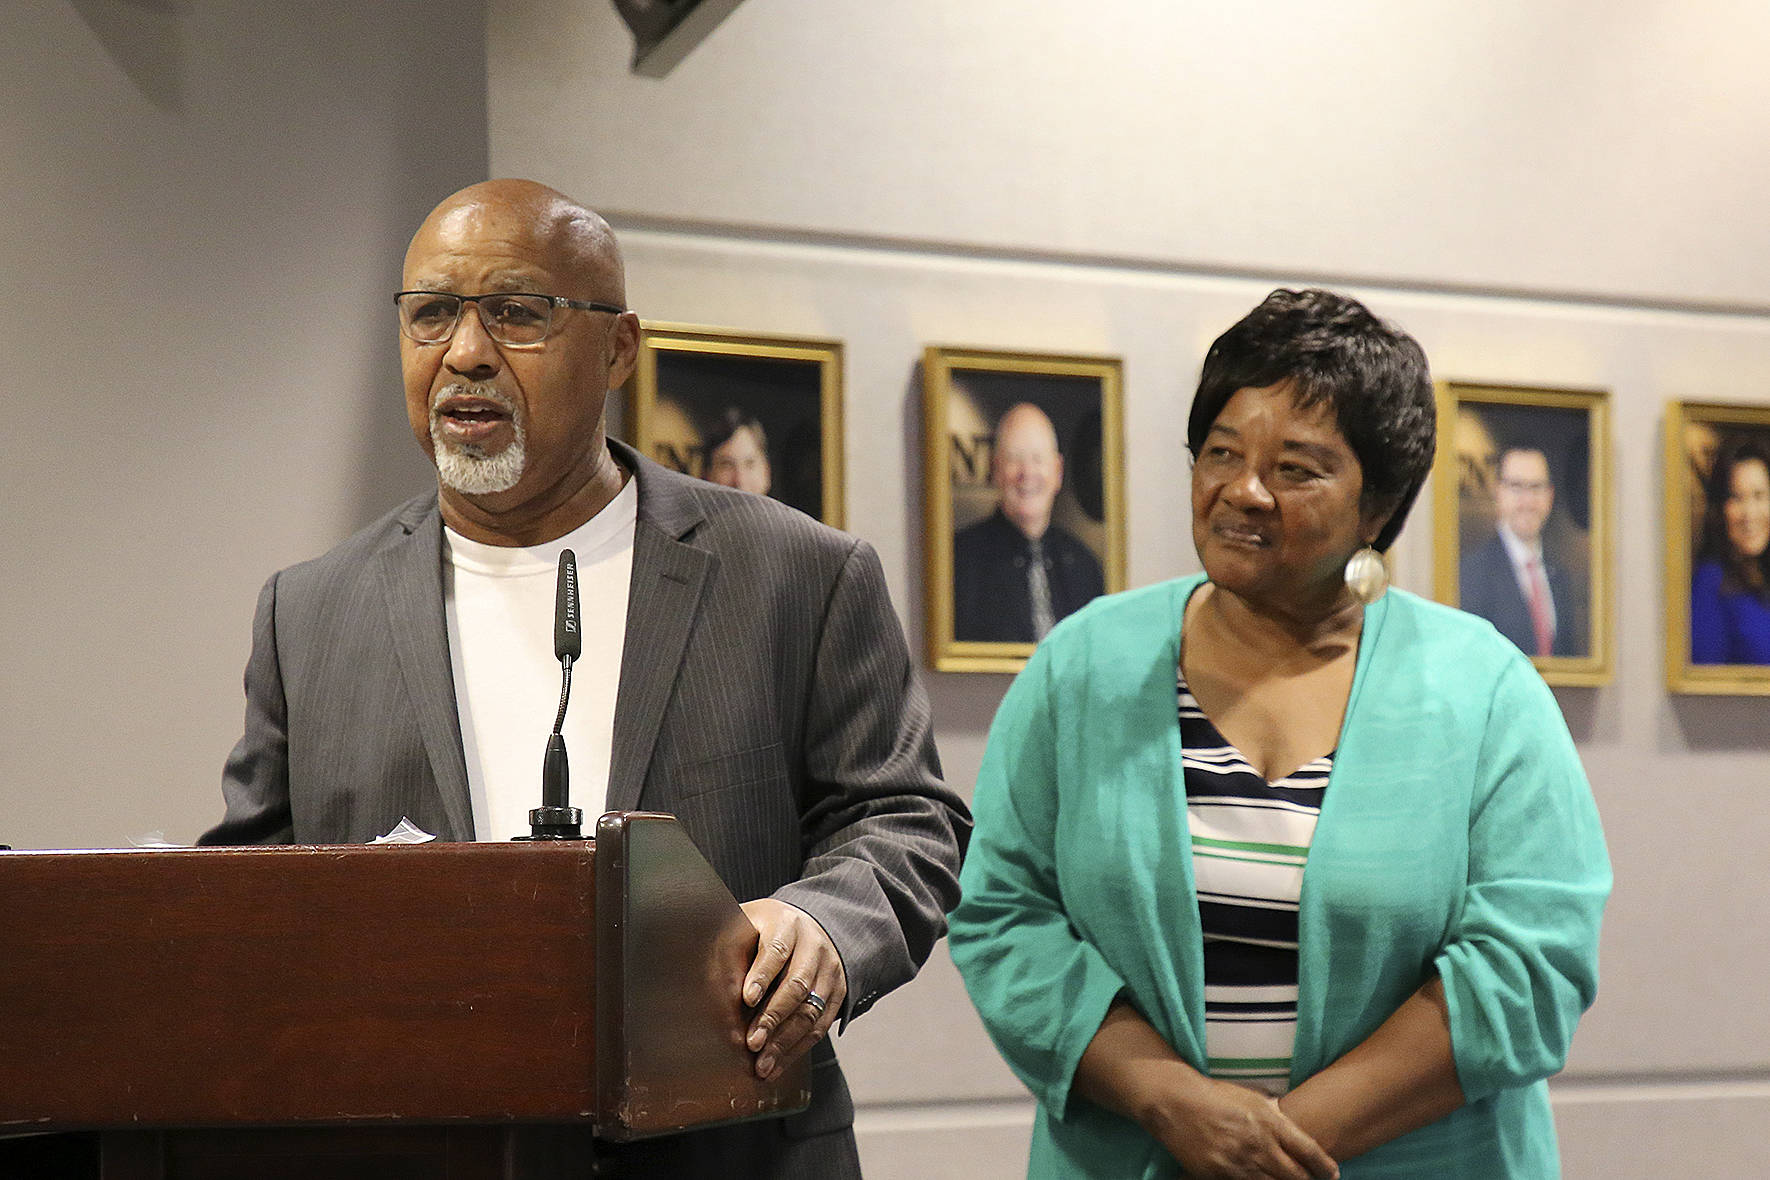 Courtesy of City of Renton. Reverend James Barnett of Still Waters Ministries and The Reverend Dr. Linda Smith of SKY Urban Empowerment Center accept the Juneteenth proclamation at the June 17, 2019, Renton City Council Meeting.